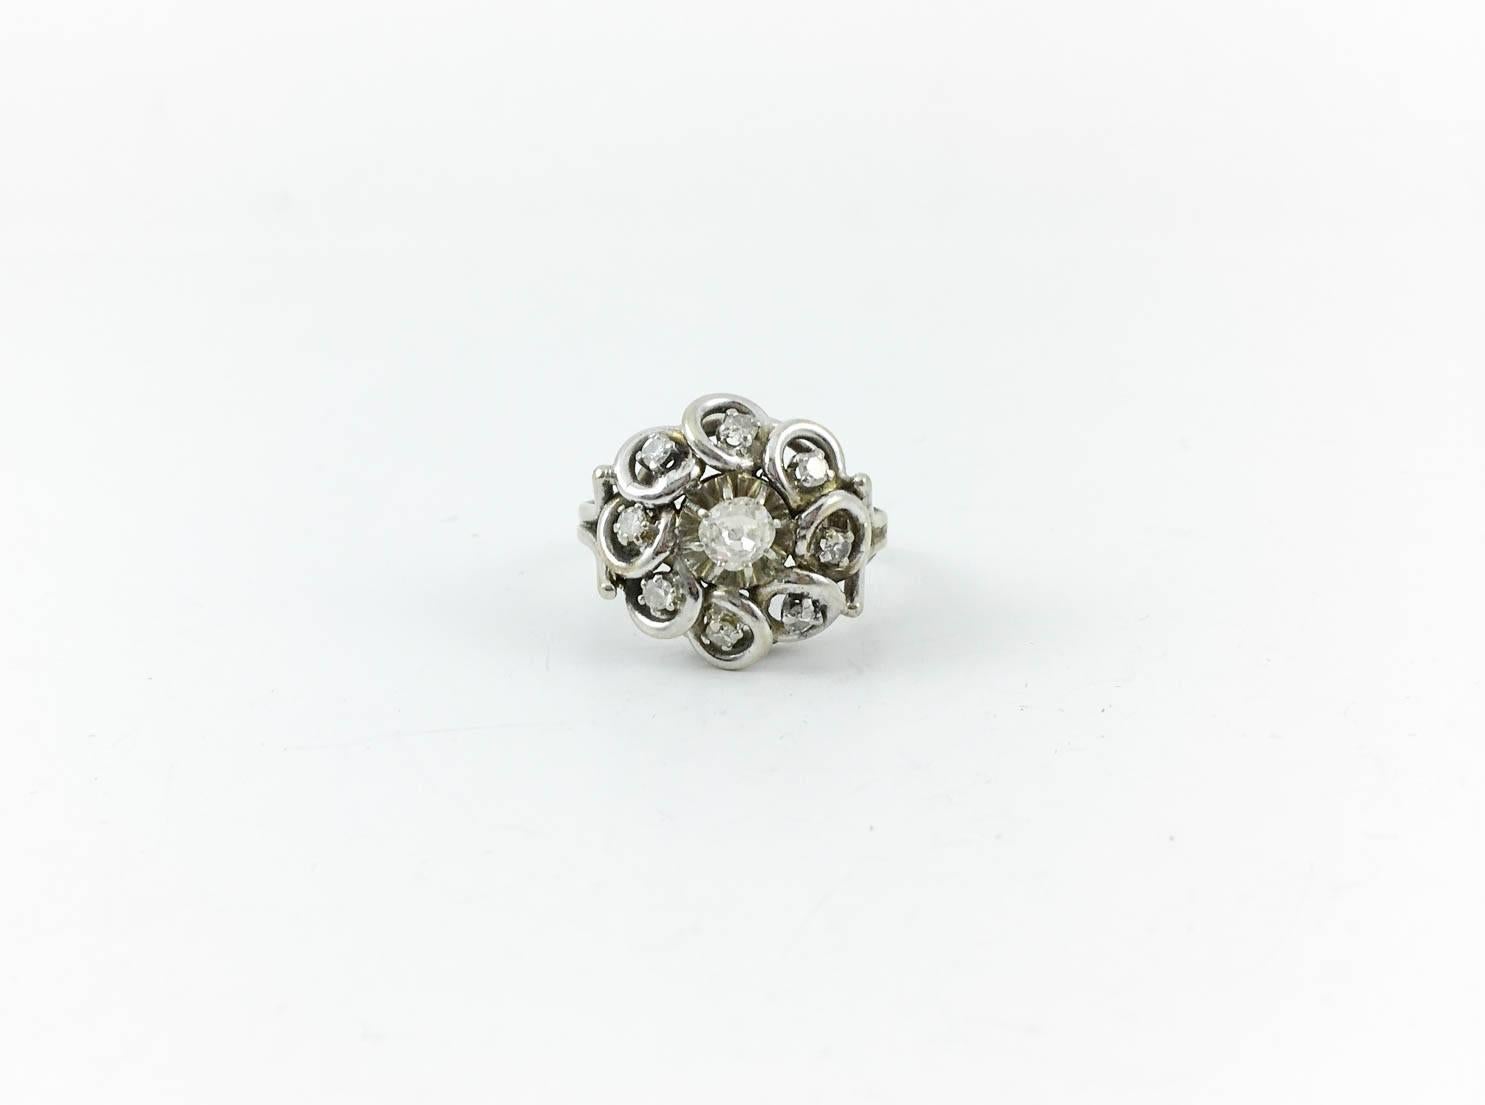 White Gold, Platinum and Diamond Cluster Ring - 1940s In Excellent Condition For Sale In London, Chelsea